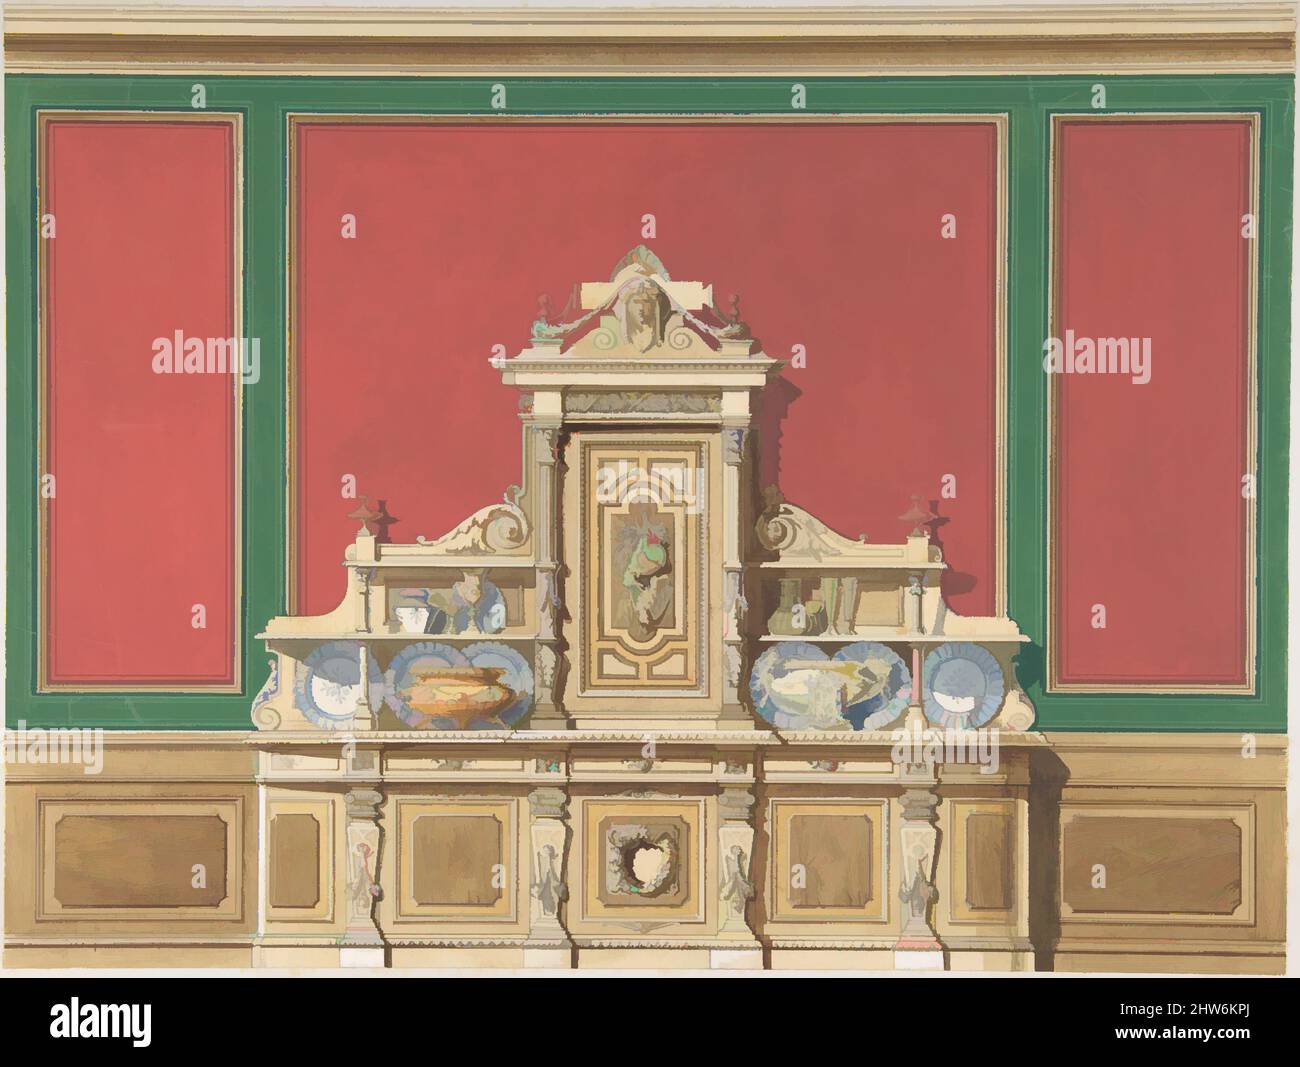 Art inspired by Interior Design for Large Display Cabinet against Red and Green Panelling, late 19th century (?), Gouache, sheet: 10 1/8 x 112 in. (25.7 x 284.5 cm), Anonymous, British, 19th century, Classic works modernized by Artotop with a splash of modernity. Shapes, color and value, eye-catching visual impact on art. Emotions through freedom of artworks in a contemporary way. A timeless message pursuing a wildly creative new direction. Artists turning to the digital medium and creating the Artotop NFT Stock Photo